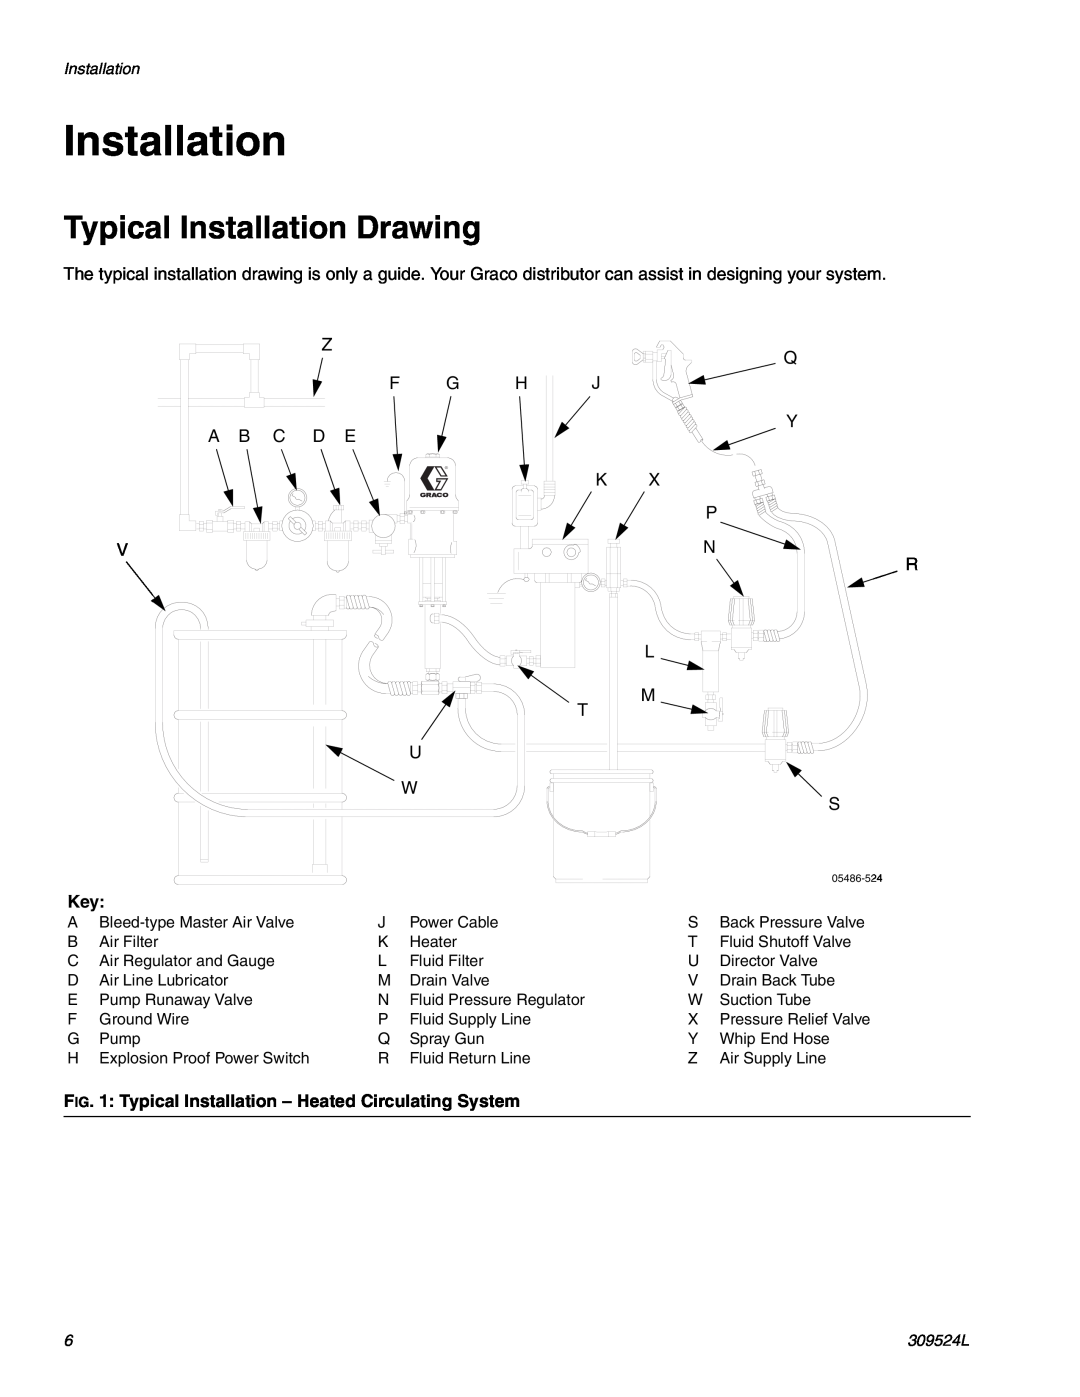 Graco 309524L important safety instructions Typical Installation Drawing 